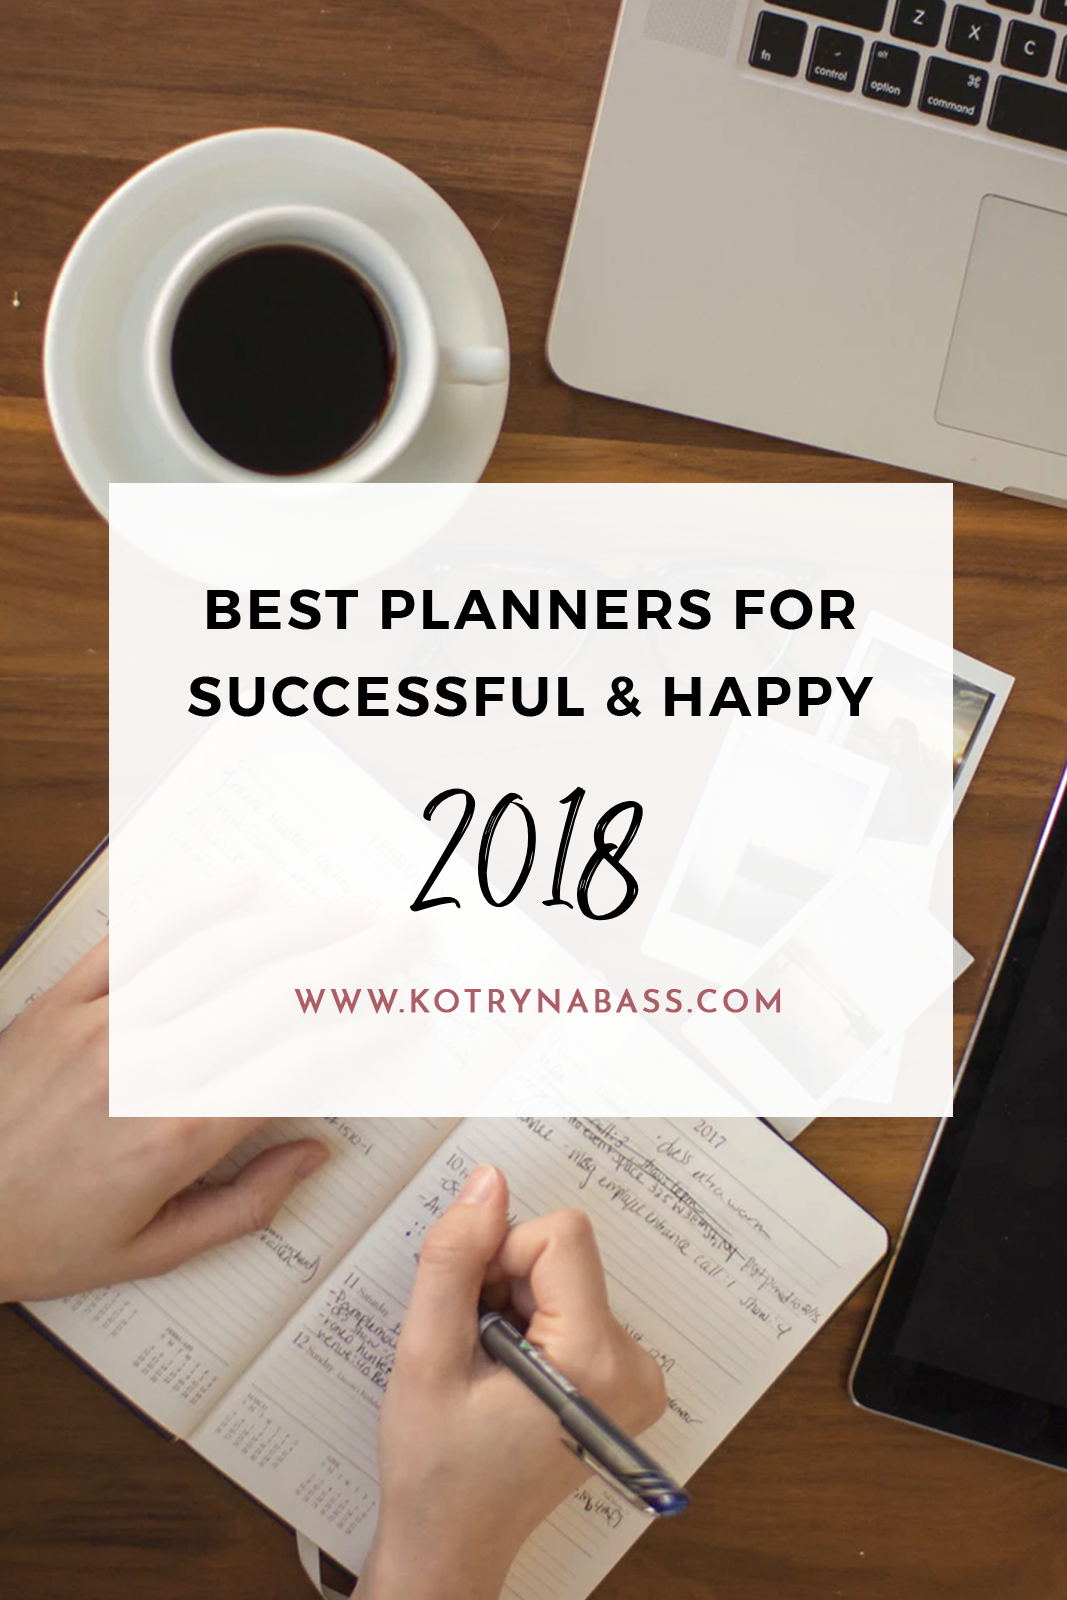 If you’re still looking for some last-minute presents or finally decided to treat yourself- a yearly planner is always the best gift during this time of the year! As every year, I do the dirty work for you & found the best planners for successful & most importantly- happy year of 2018. Shop till you drop!